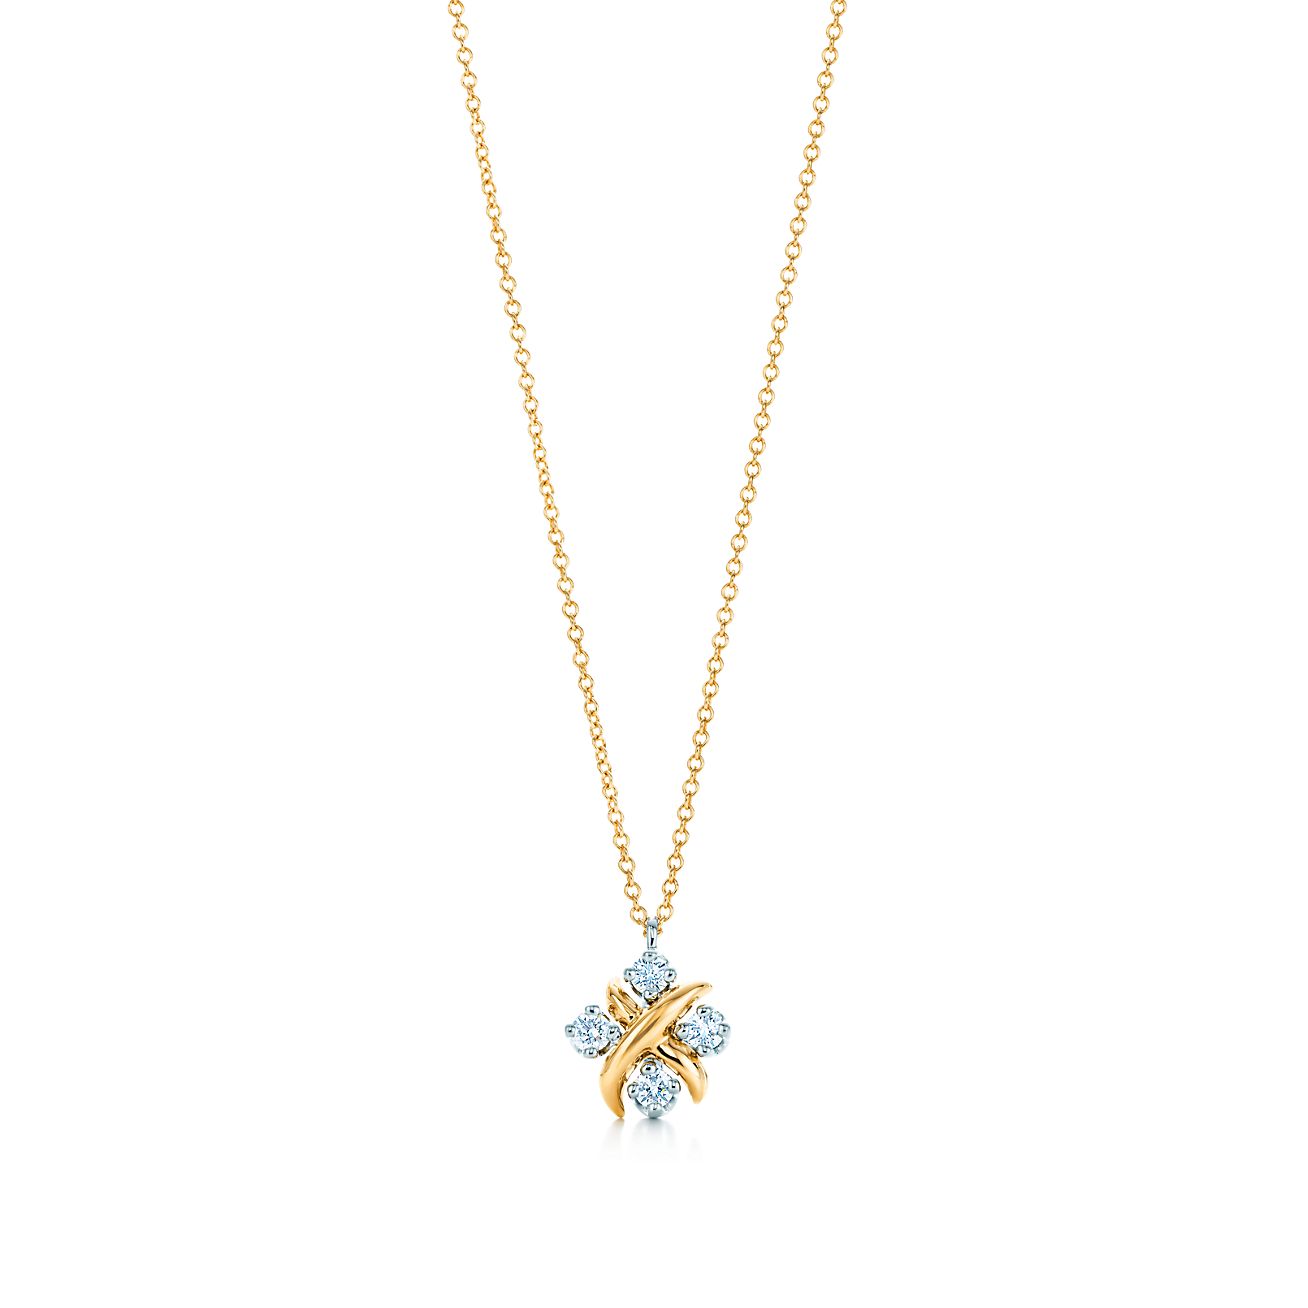 tiffany and co pendant necklace